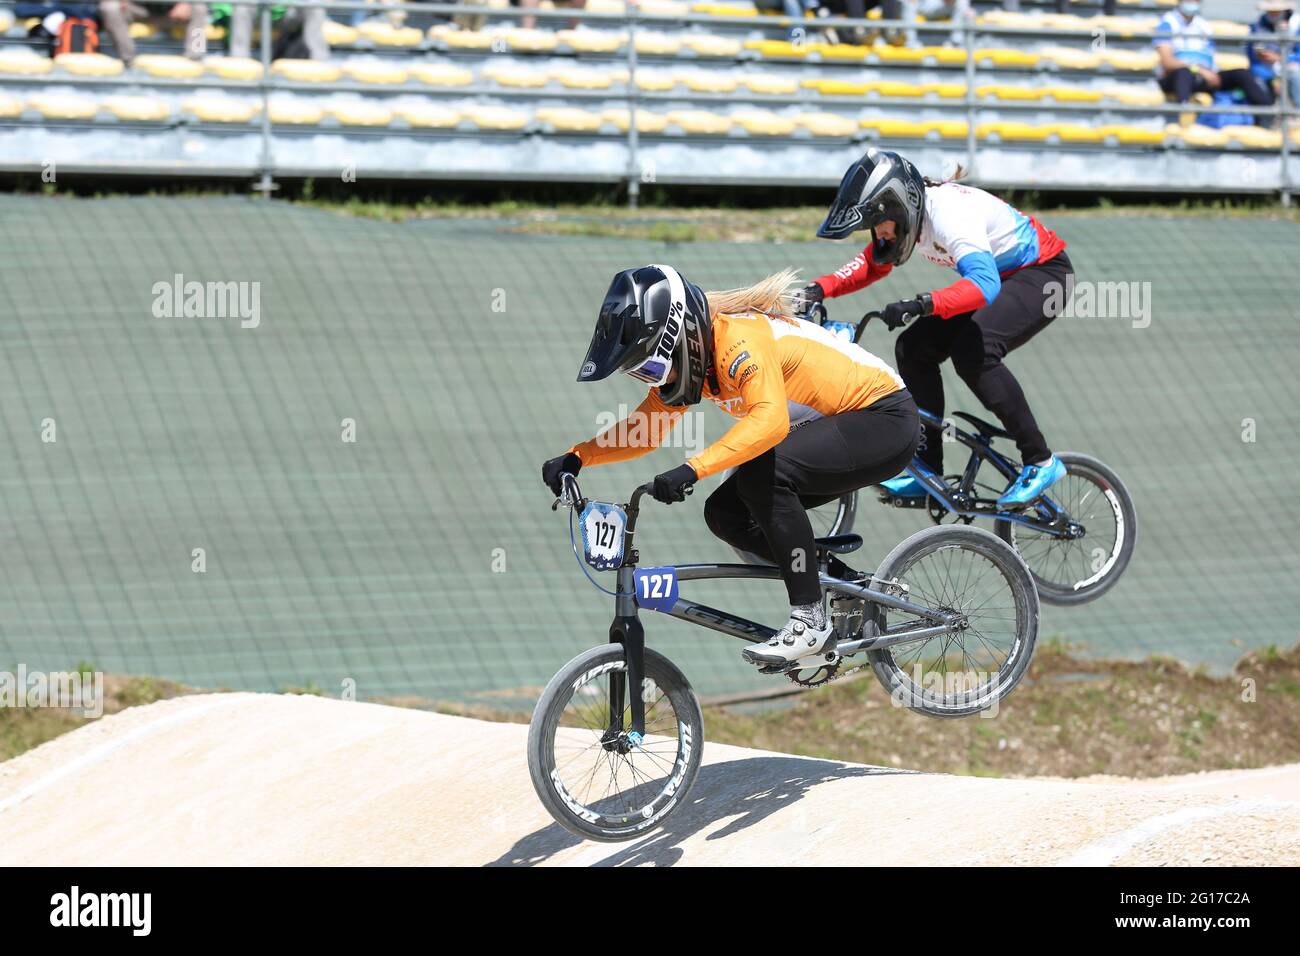 Andrea YEPES ESCOBAR of Colombia (127) competes in the UEC BMX European Cup  Round 2 at the BMX Olympic Arena on May 2nd 2021 in Verona, Italy Stock  Photo - Alamy